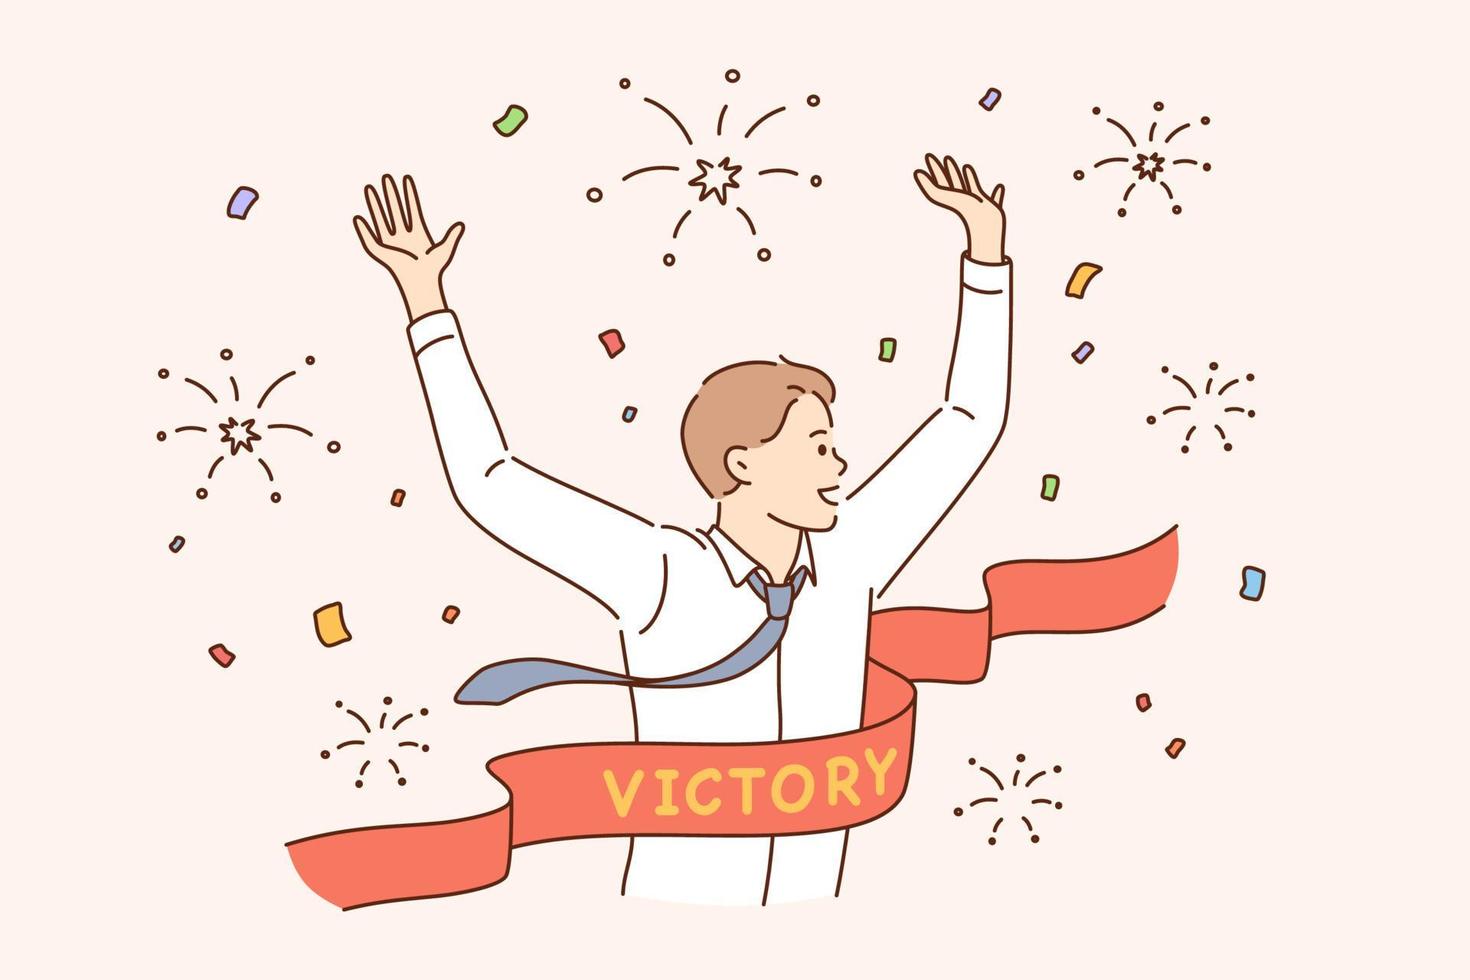 Business success, leadership, winner reaching goal concept. Young smiling businessman cartoon character running reaching goal celebrating victory at finishing line as first winner feeling happy vector